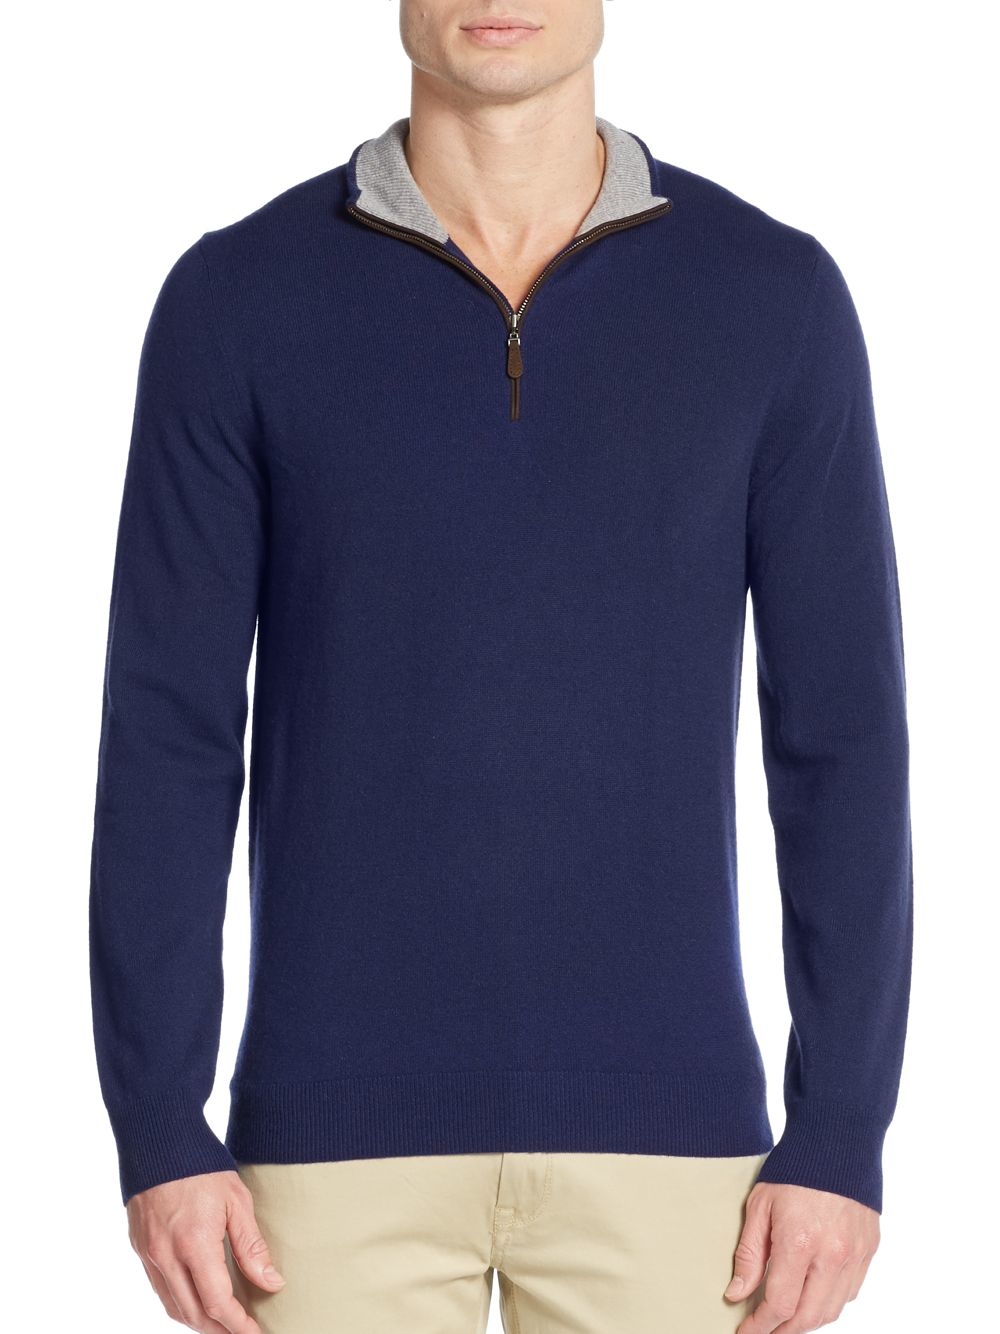 Saks Fifth Avenue Cashmere Zip-front Sweater in Blue for Men - Lyst